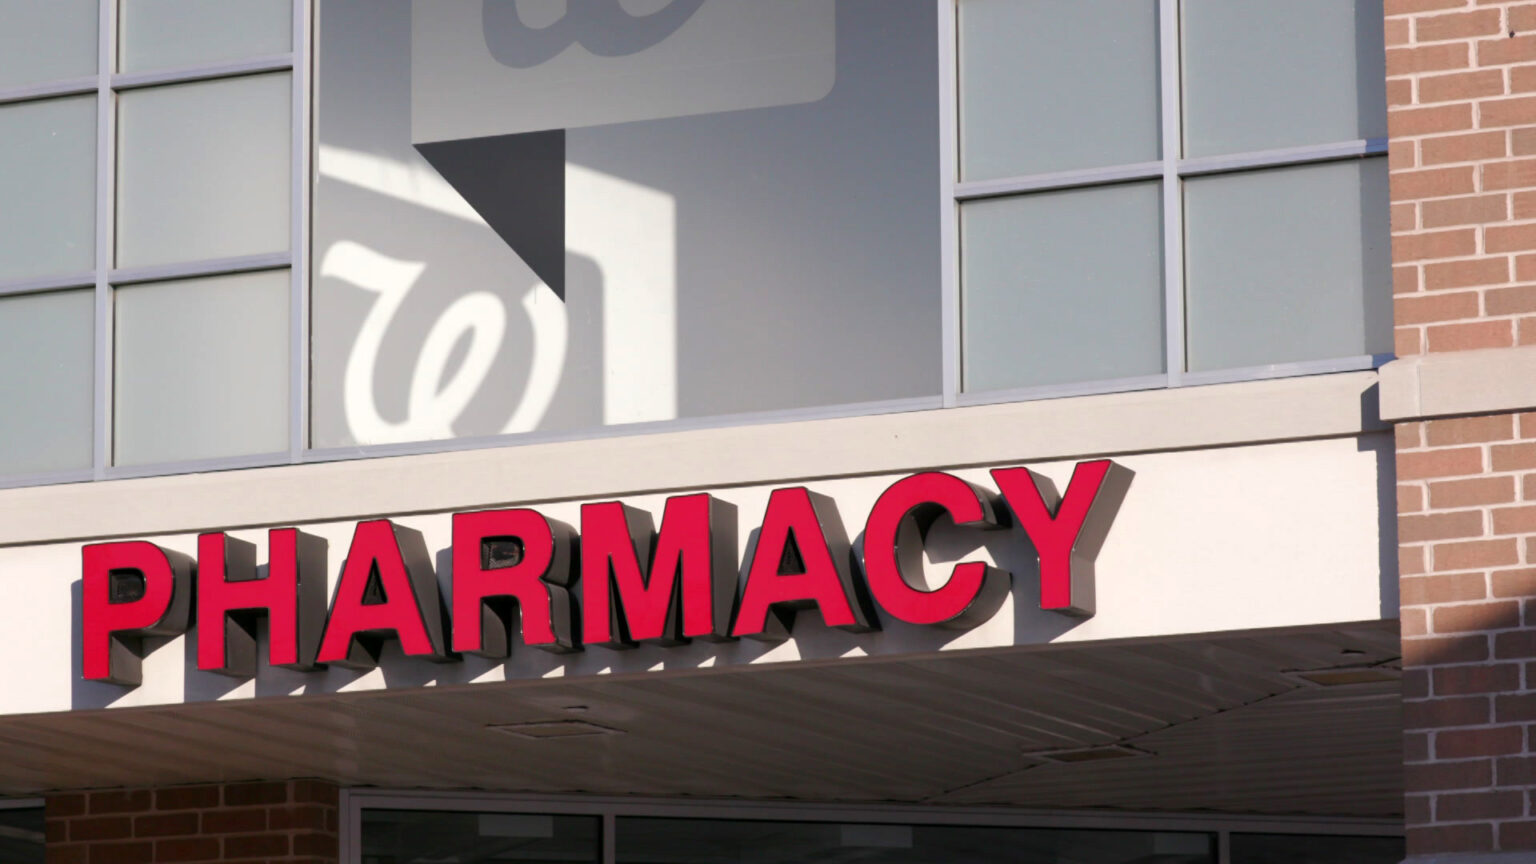 Sign letters affixed to an awning above the entrance to a building spell PHARMACY, with the shadow of a window label of the cursive w wordmark for Walgreens visible above.